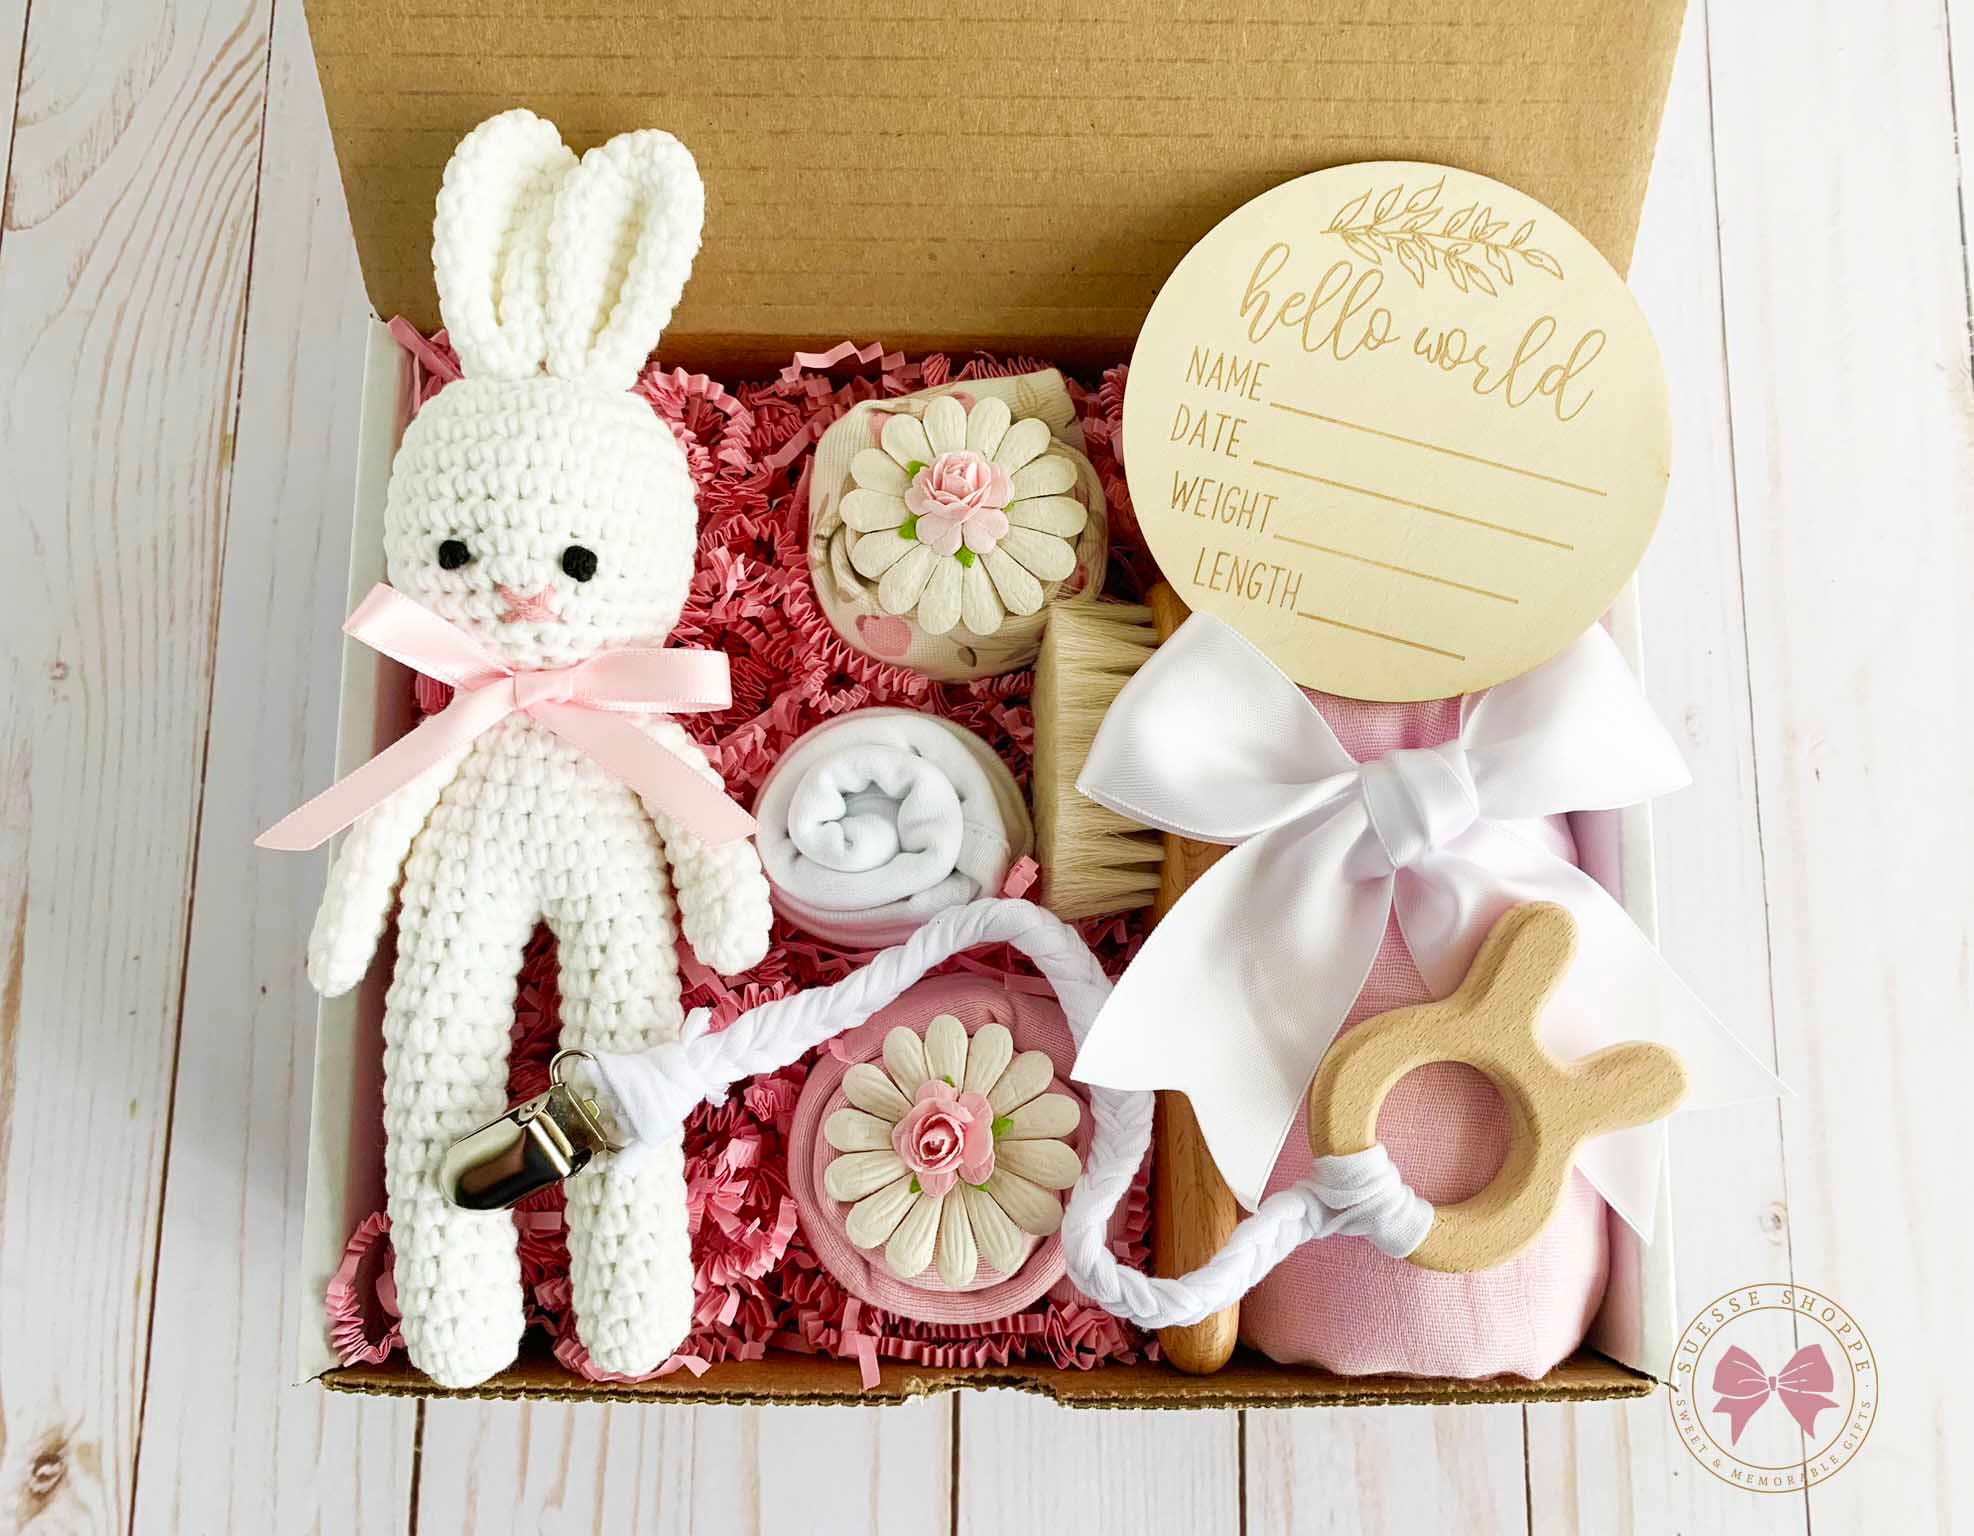 Baby Shower Gifts, Newborn Baby Gifts for Girls, Gender Reveal Basket  Includes Baby Blanket Rabbit Rattle Toy, Funny Socks Bibs & Greeting Card